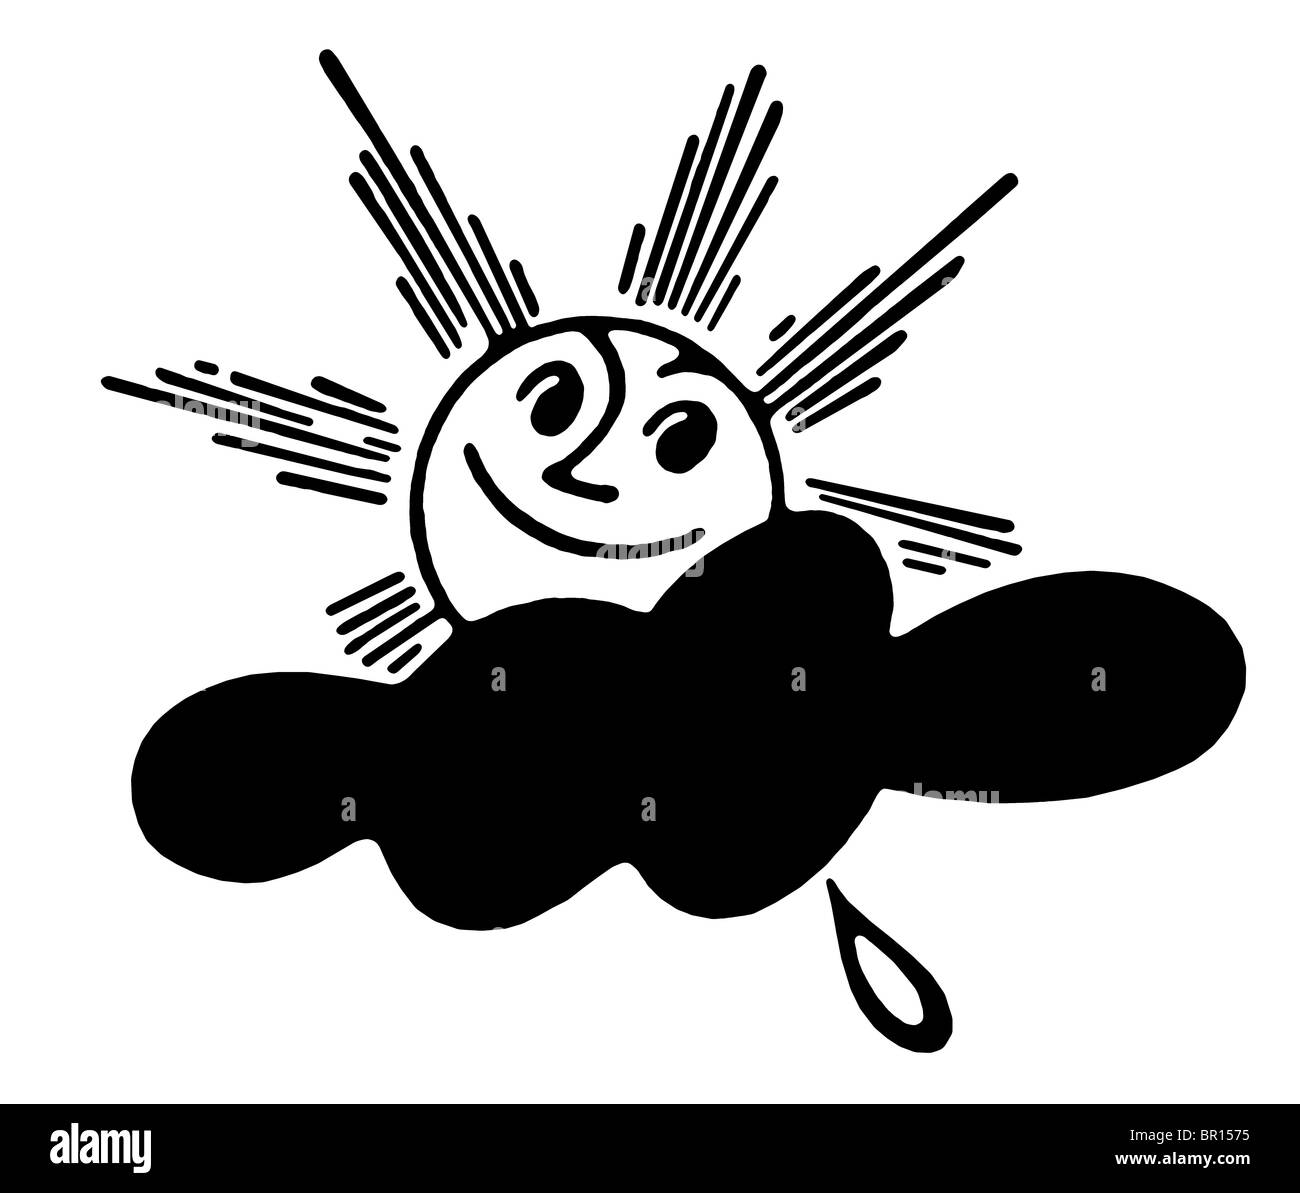 A black and white version of a cartoon style image of a shining sun Stock Photo